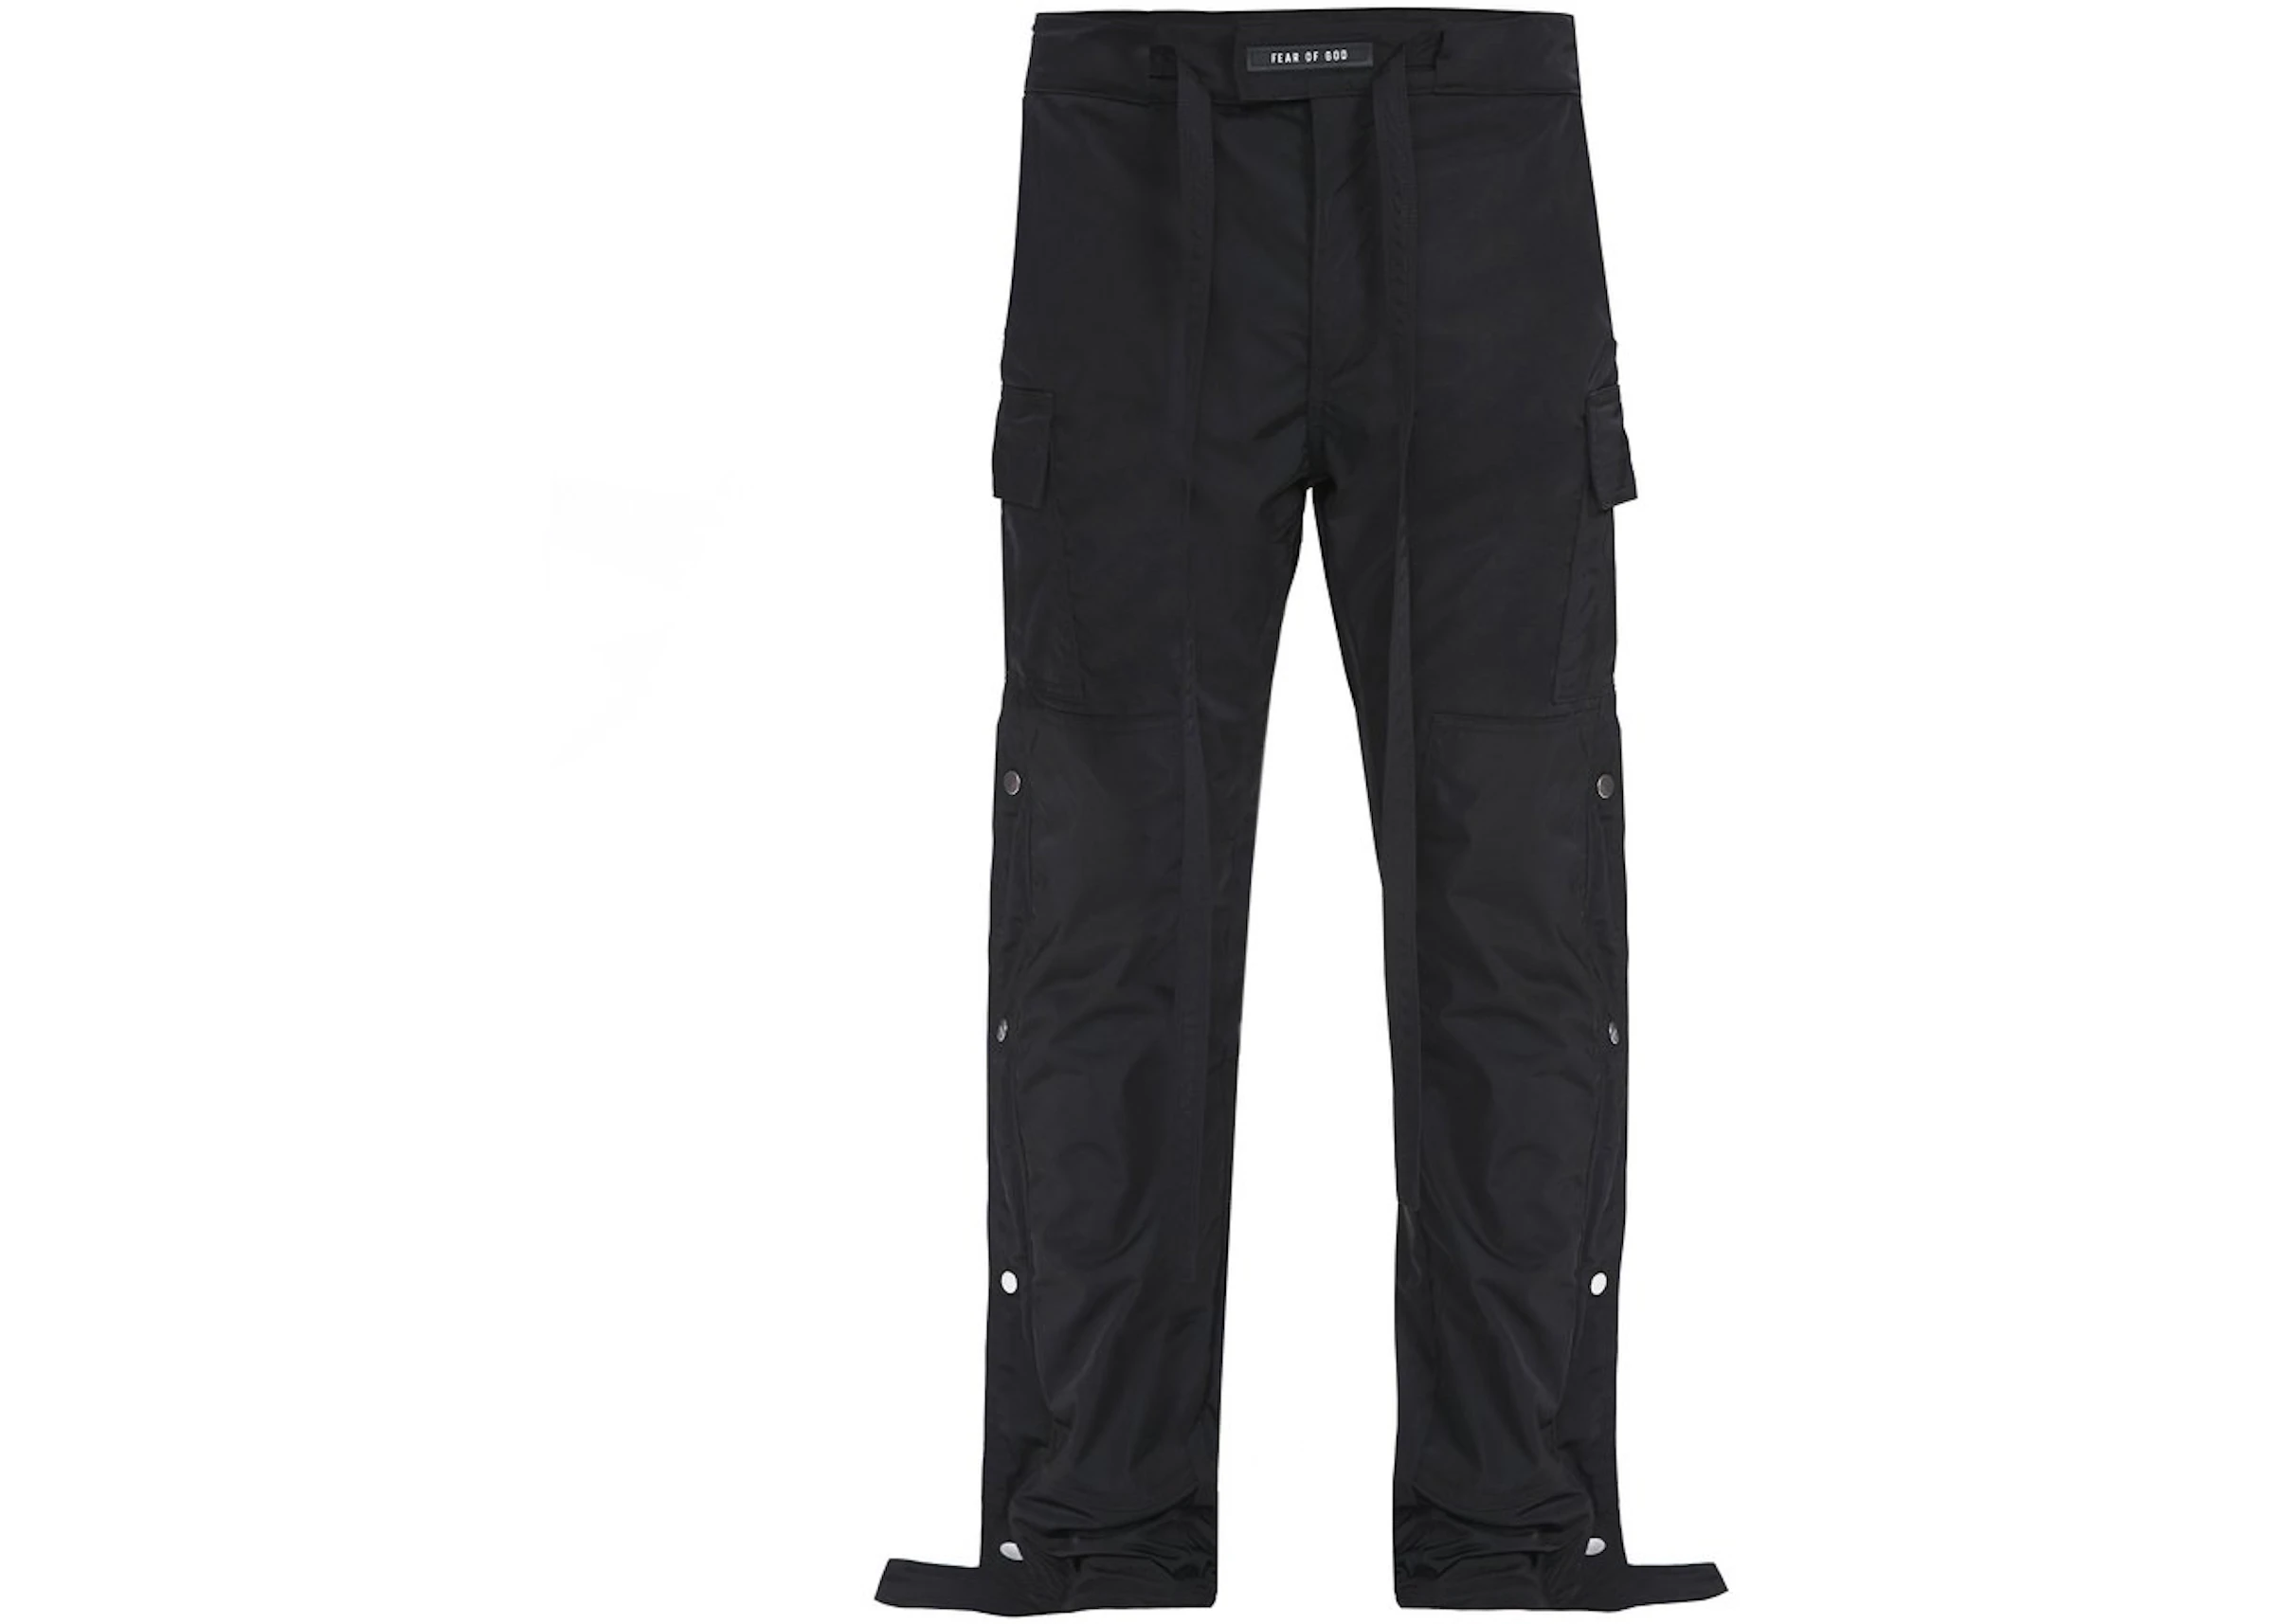 FEAR OF GOD Nylon Cargo Snap Pants Black Sixth Collection - US